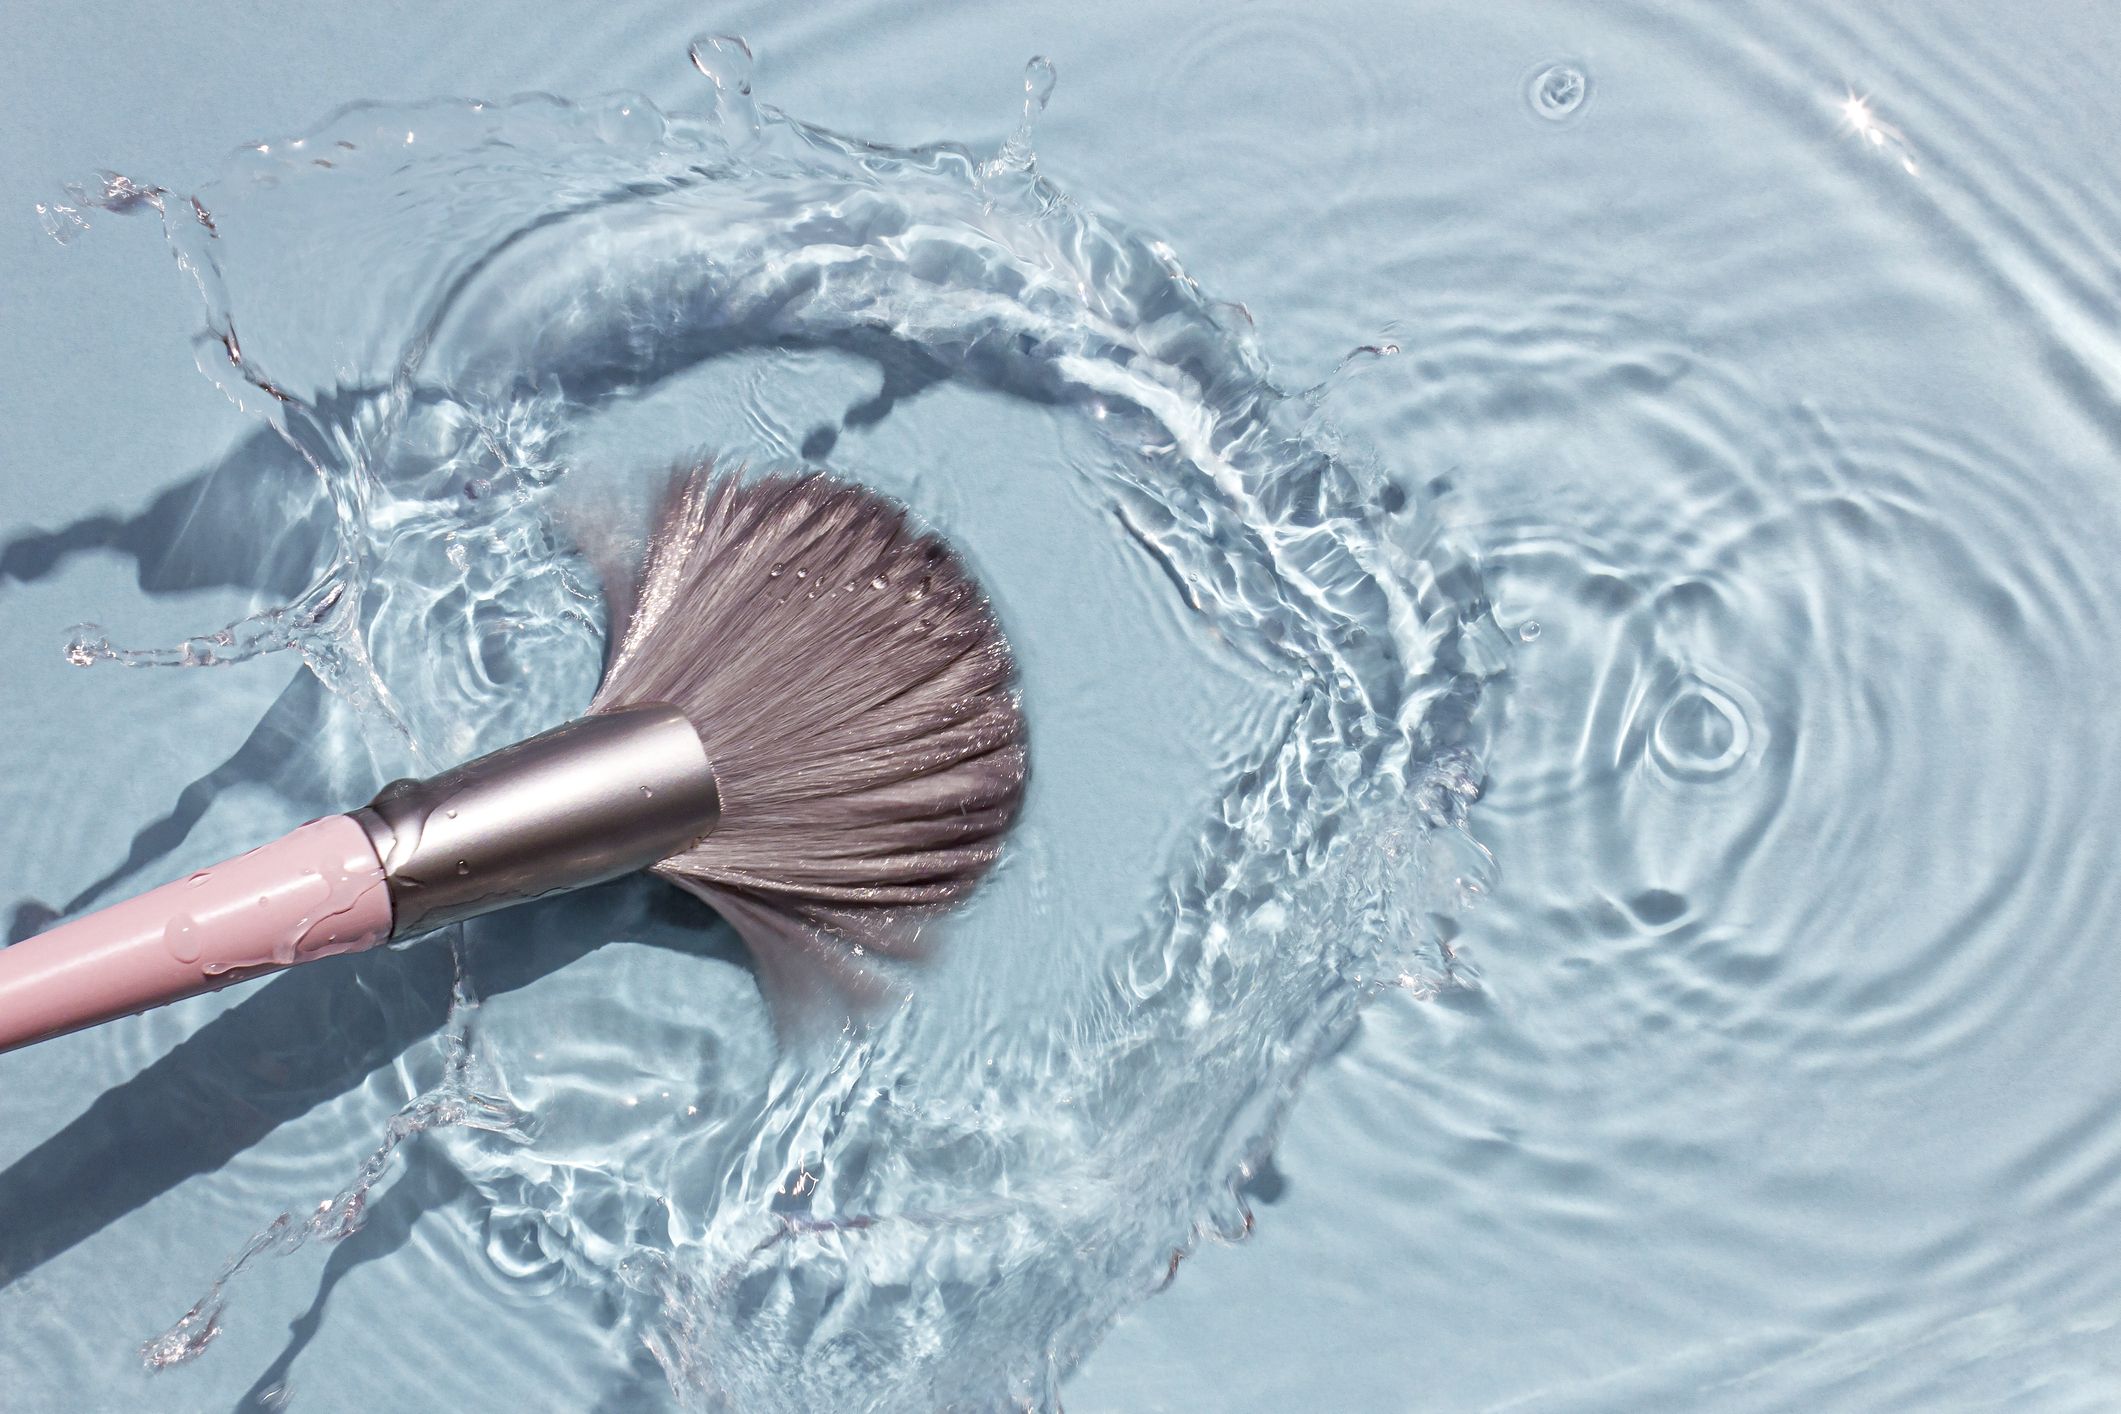 We Rated The Best Makeup Brush Cleaners And Machines!